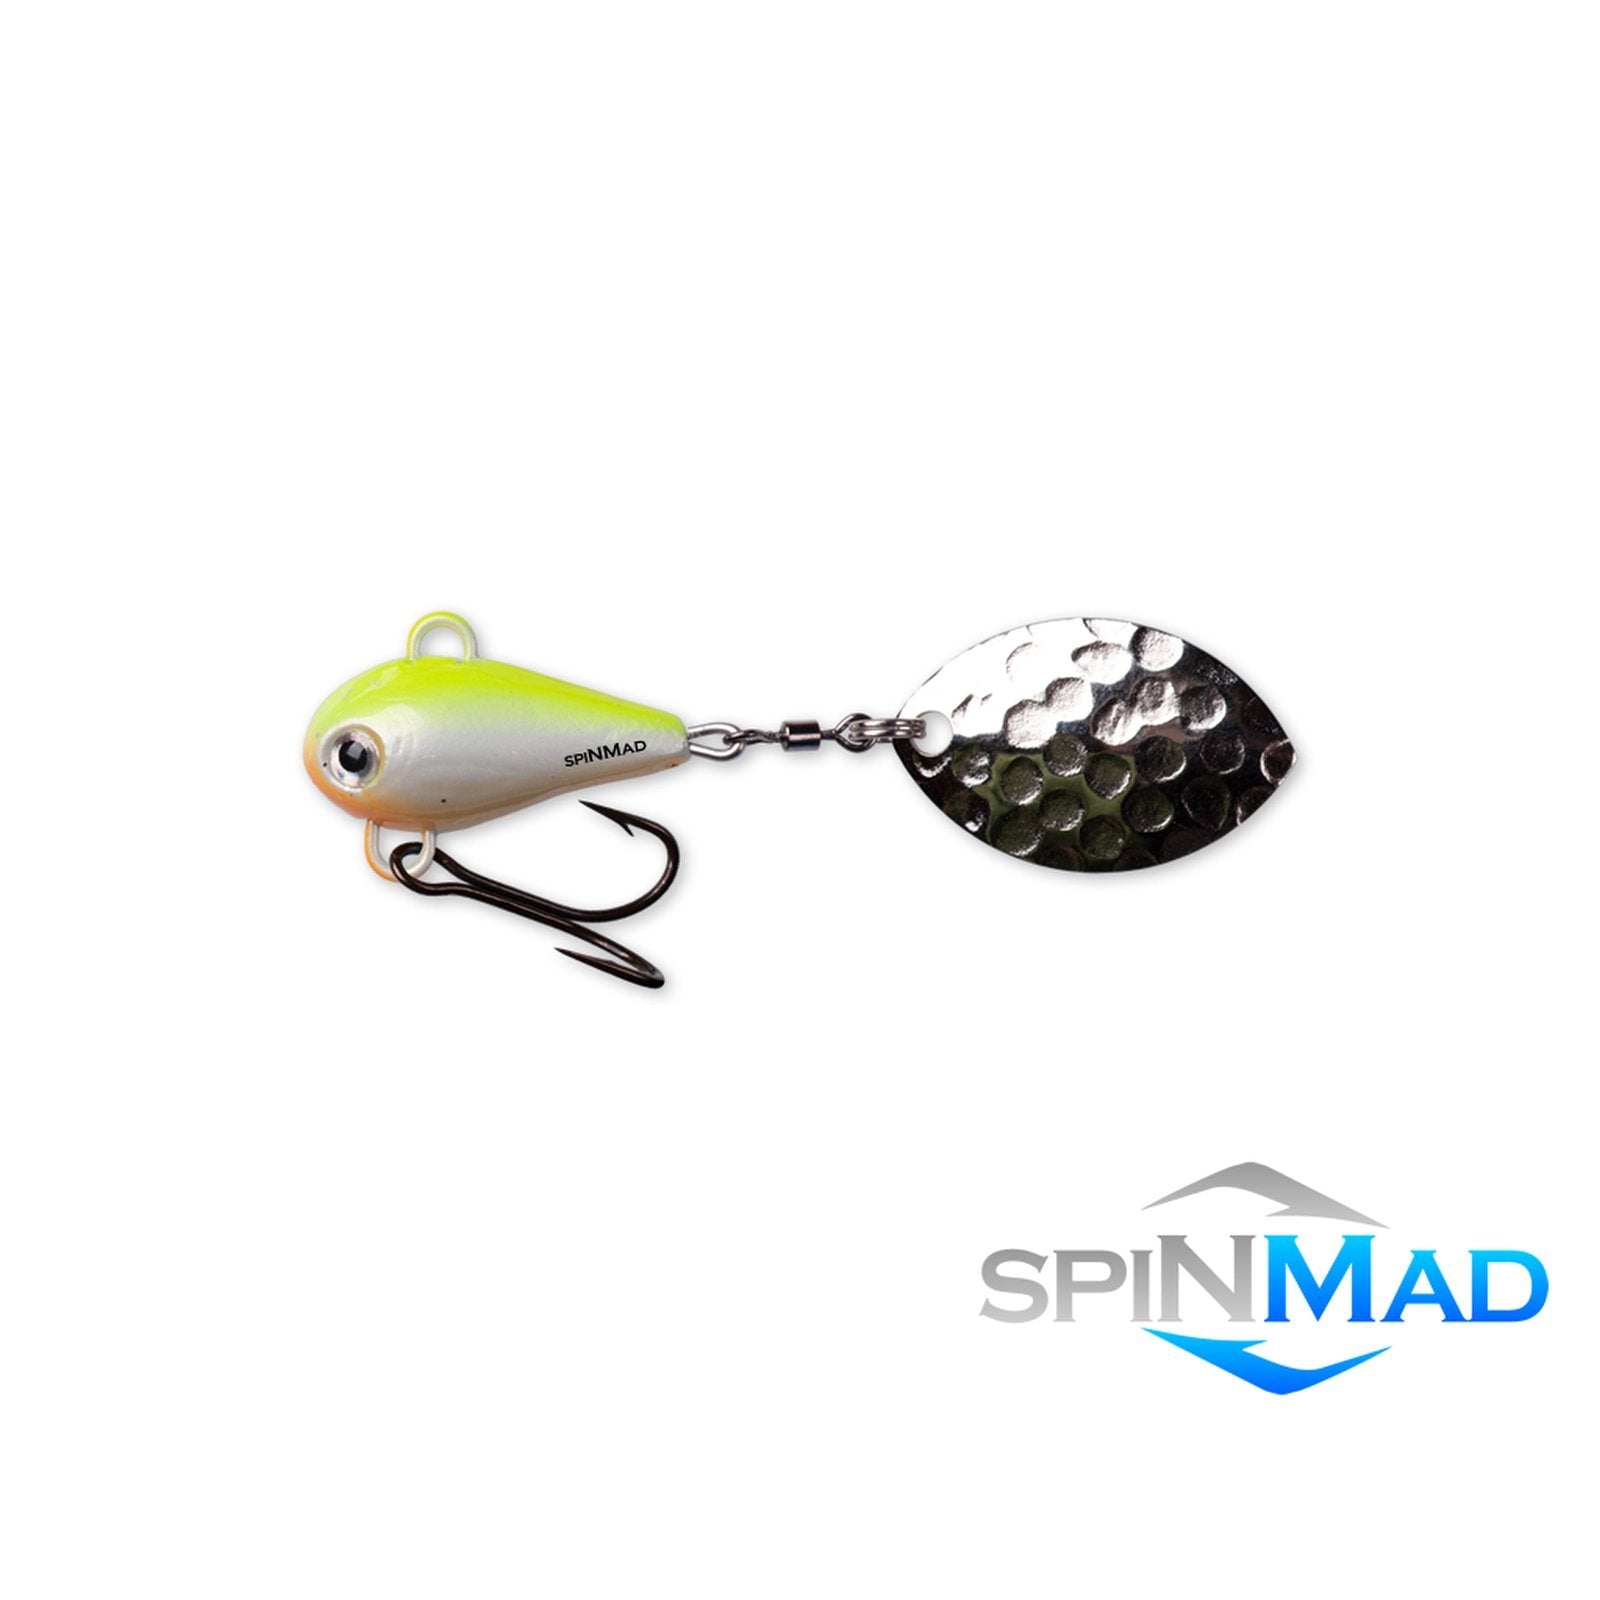 SpinMad MAG 6 0706